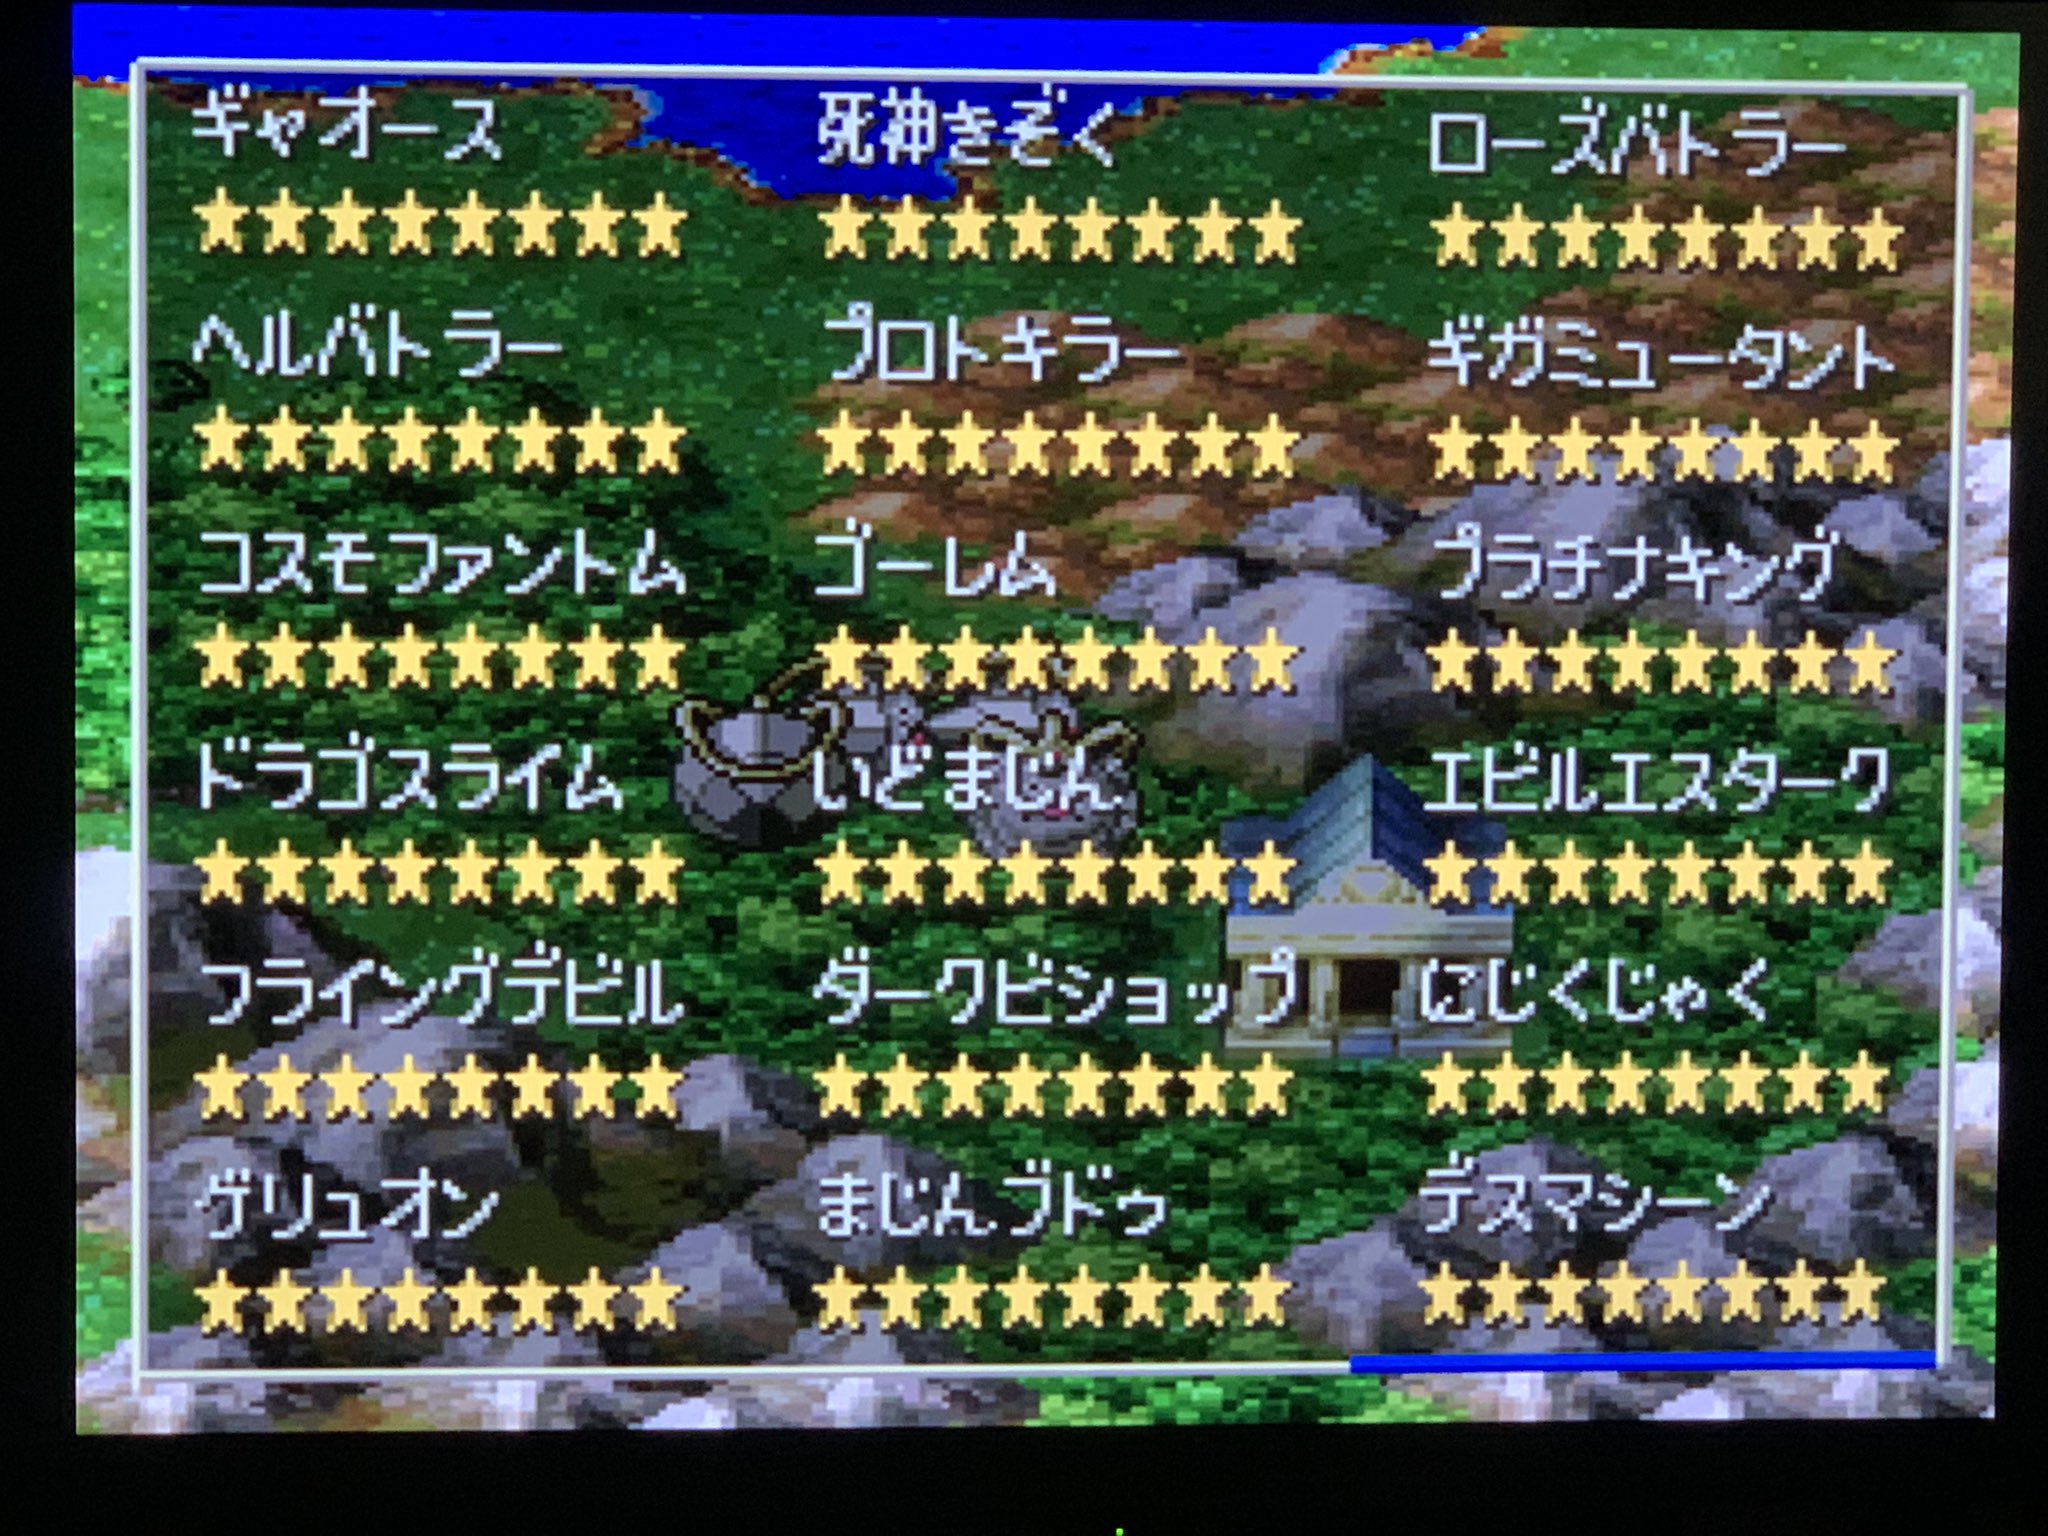 Hotaka It S All Completed Members Of The Party Have Finished Their Hard Work At Last How Beautiful That Full Of Yellow Stars Dq7 ドラクエ7 Ps T Co Jm5fmnczh1 Twitter